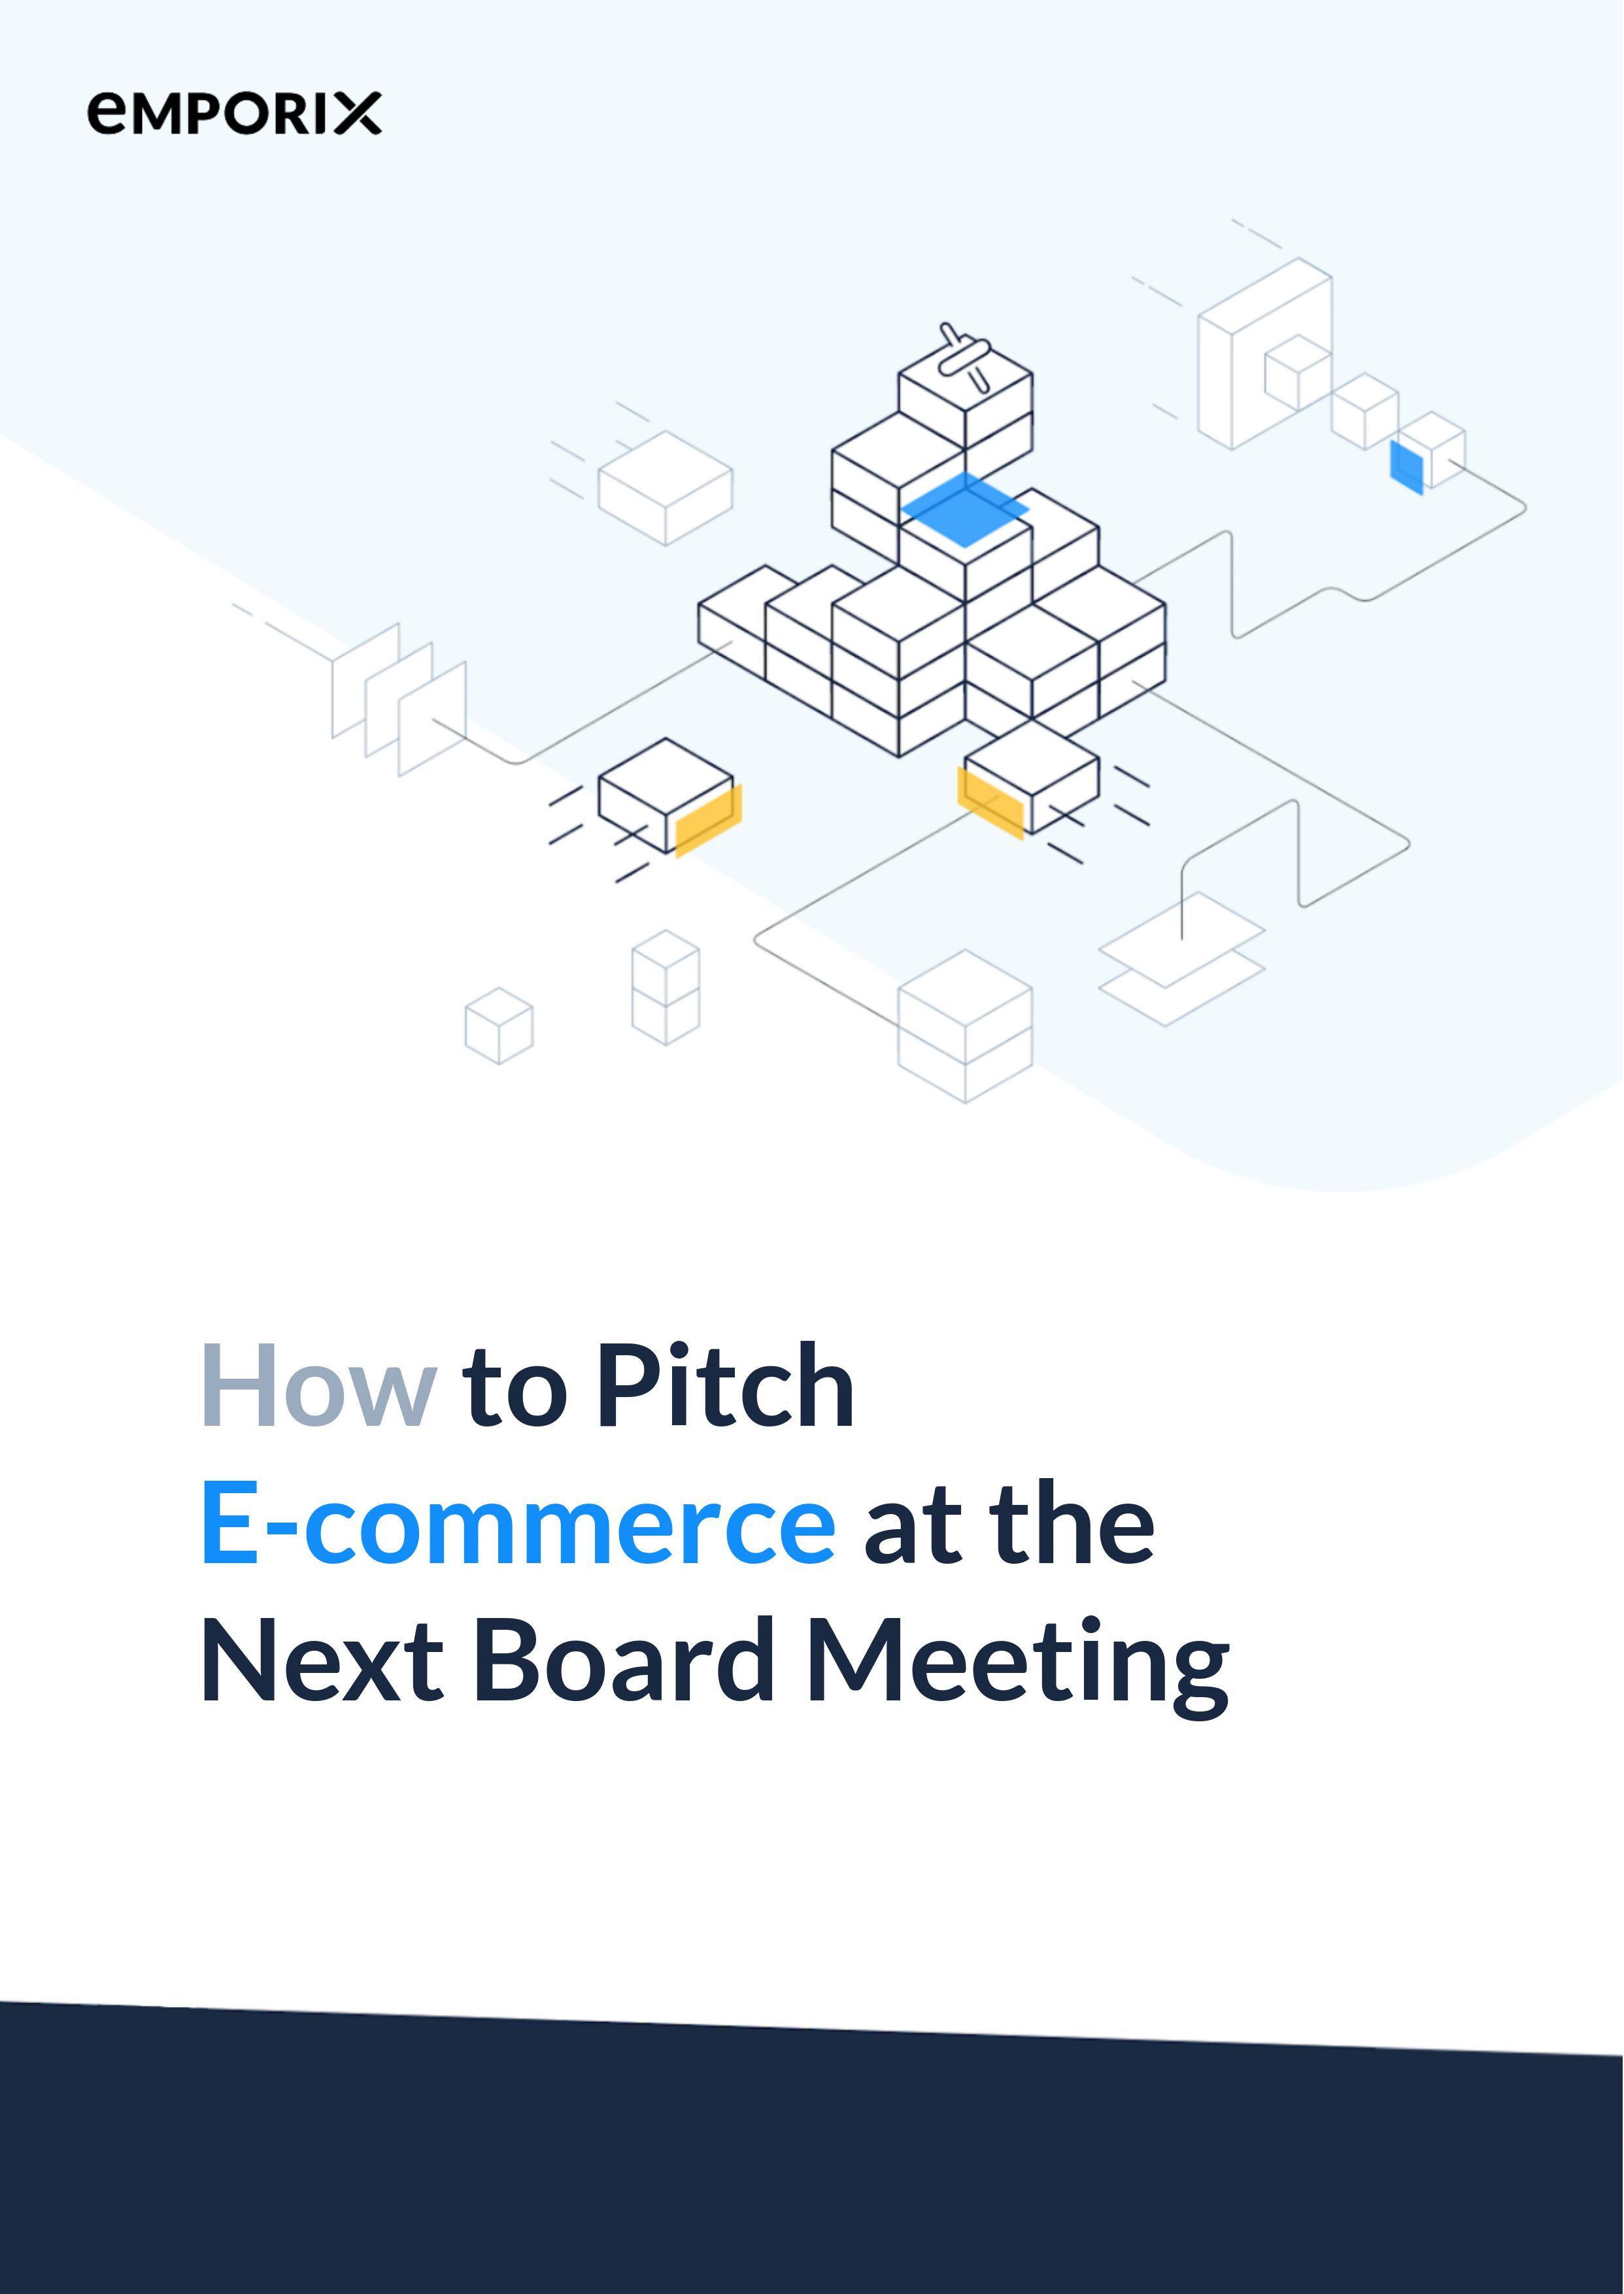 How to Pitch E-commerce at the Next Board Meeting